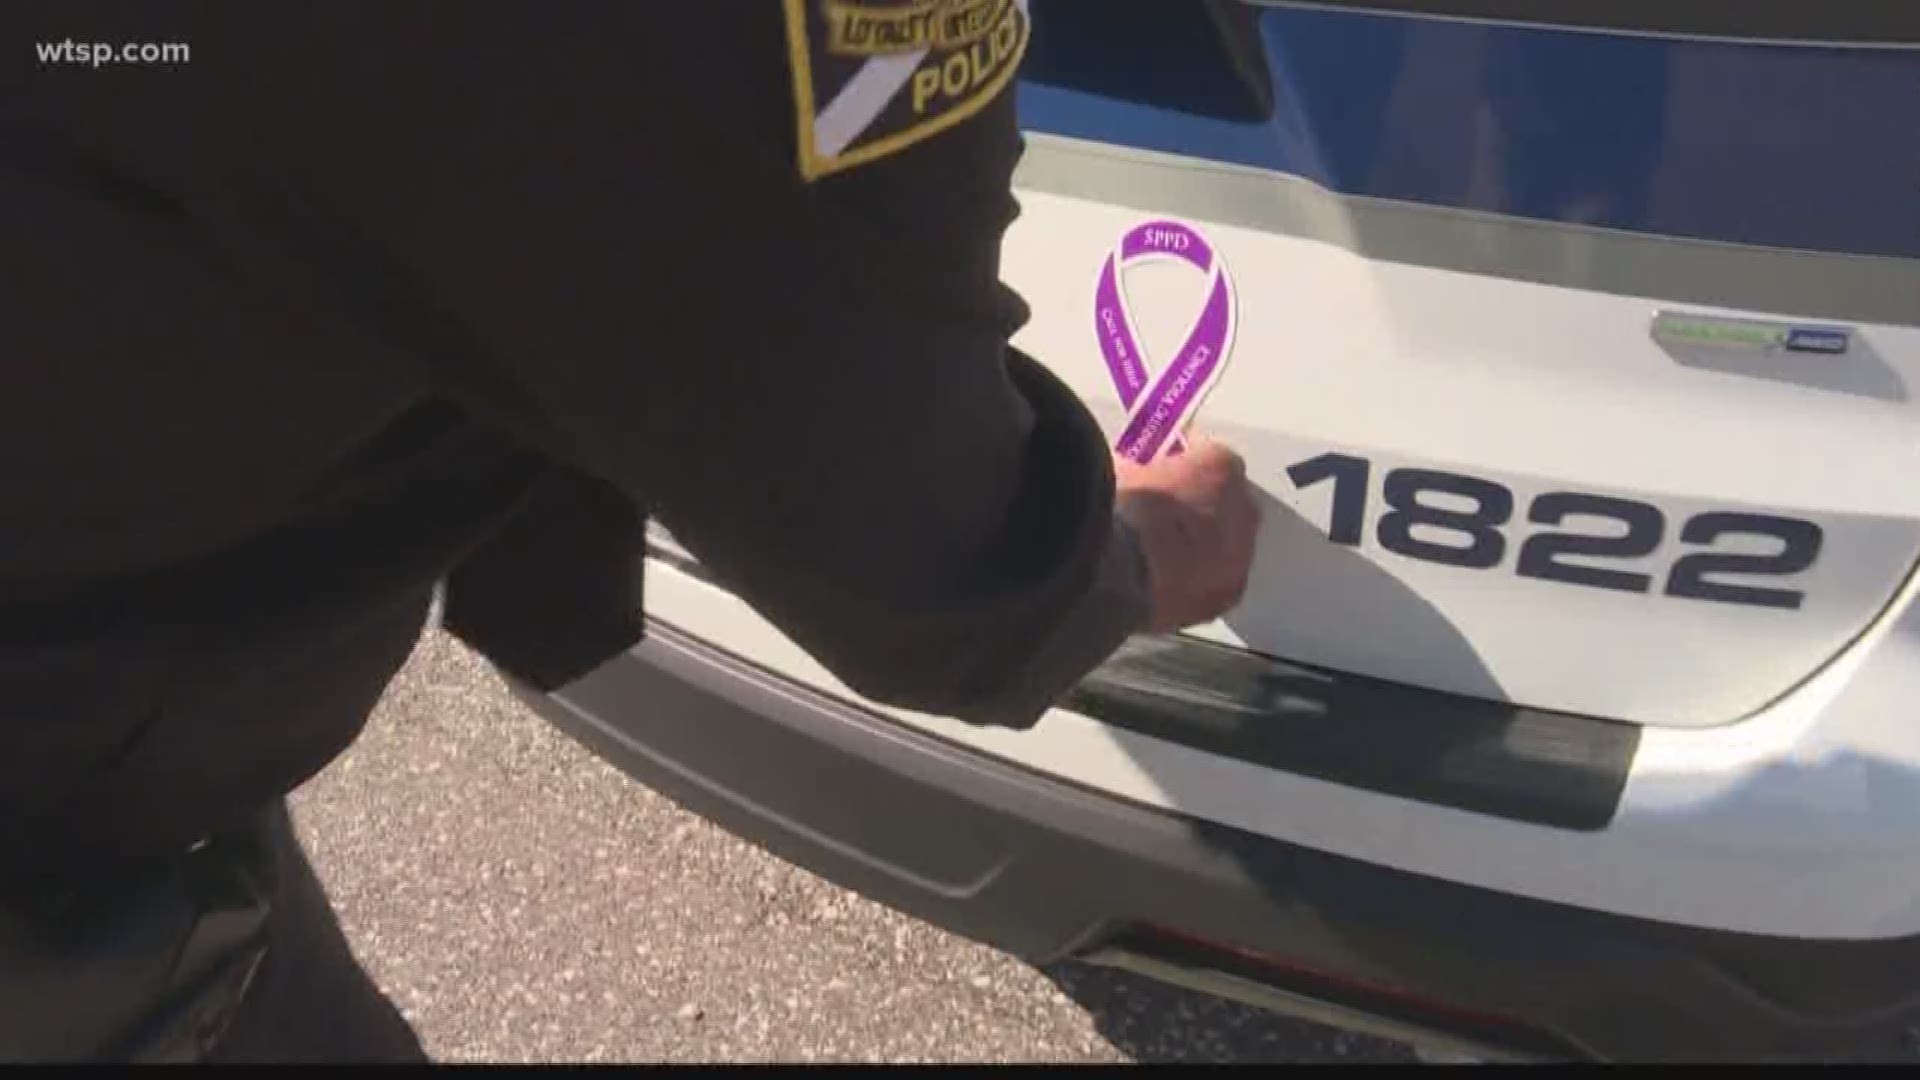 Patrol cars will carry a message that domestic violence is not acceptable.